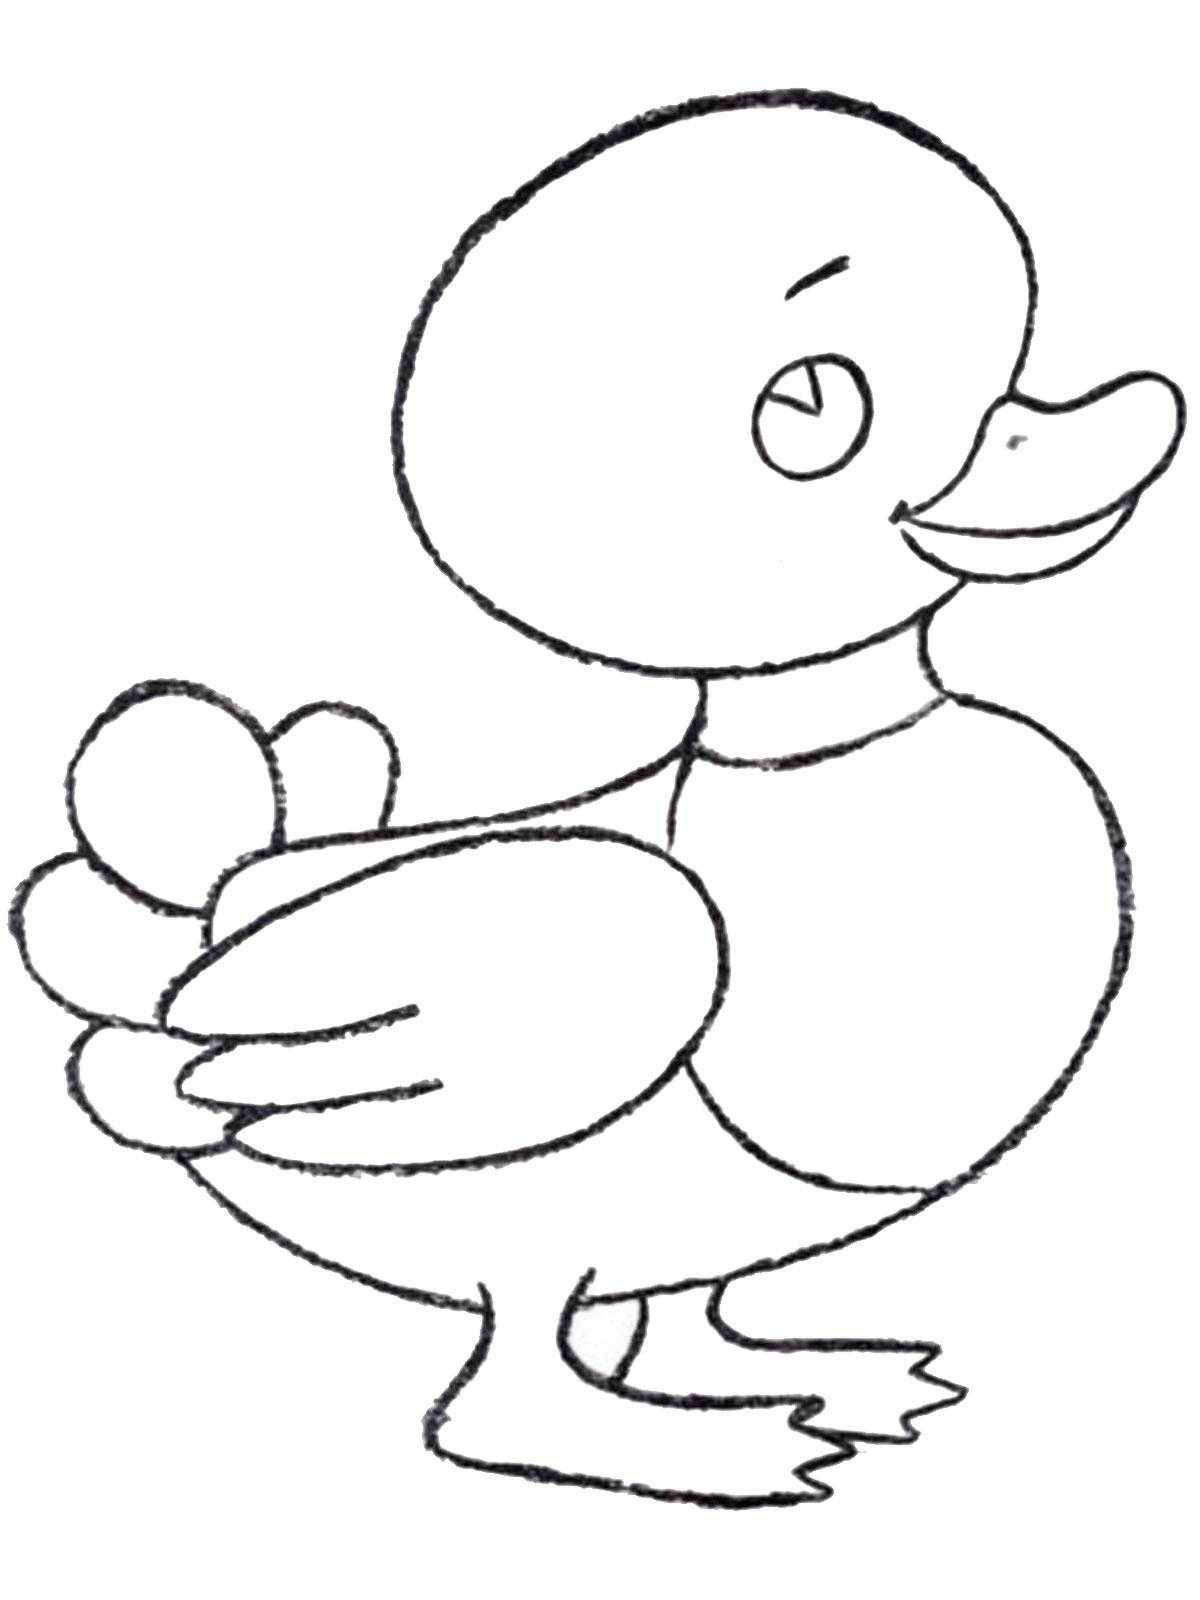 Coloring cute duckling for kids